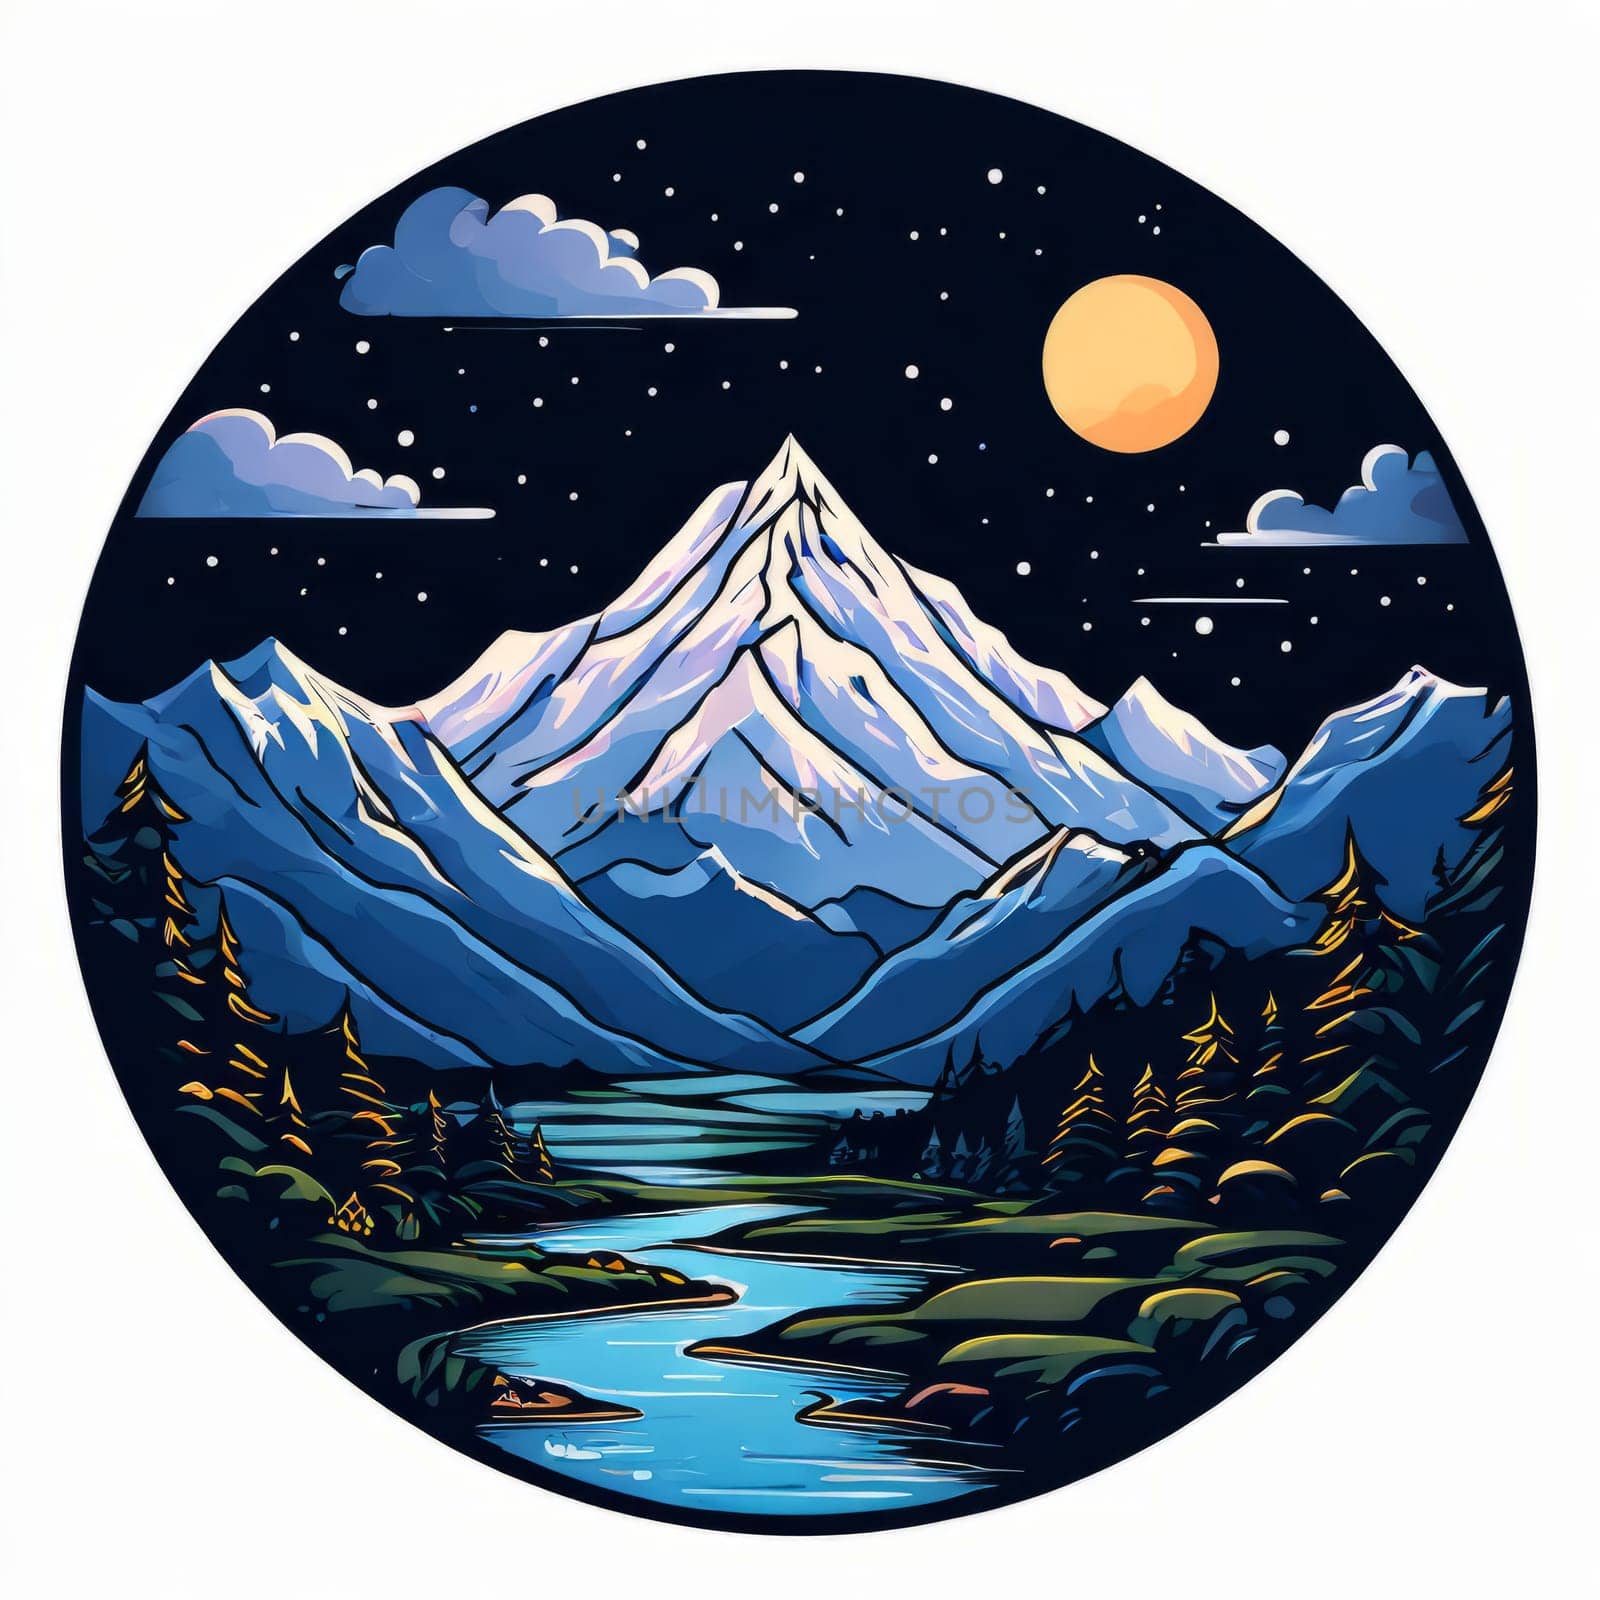 Serene illustration of mountains, river enclosed within circular frame, depicting natural beauty, tranquility. Printed on merchandise like tshirts, mugs, notebooks for nature lovers, travel brochures